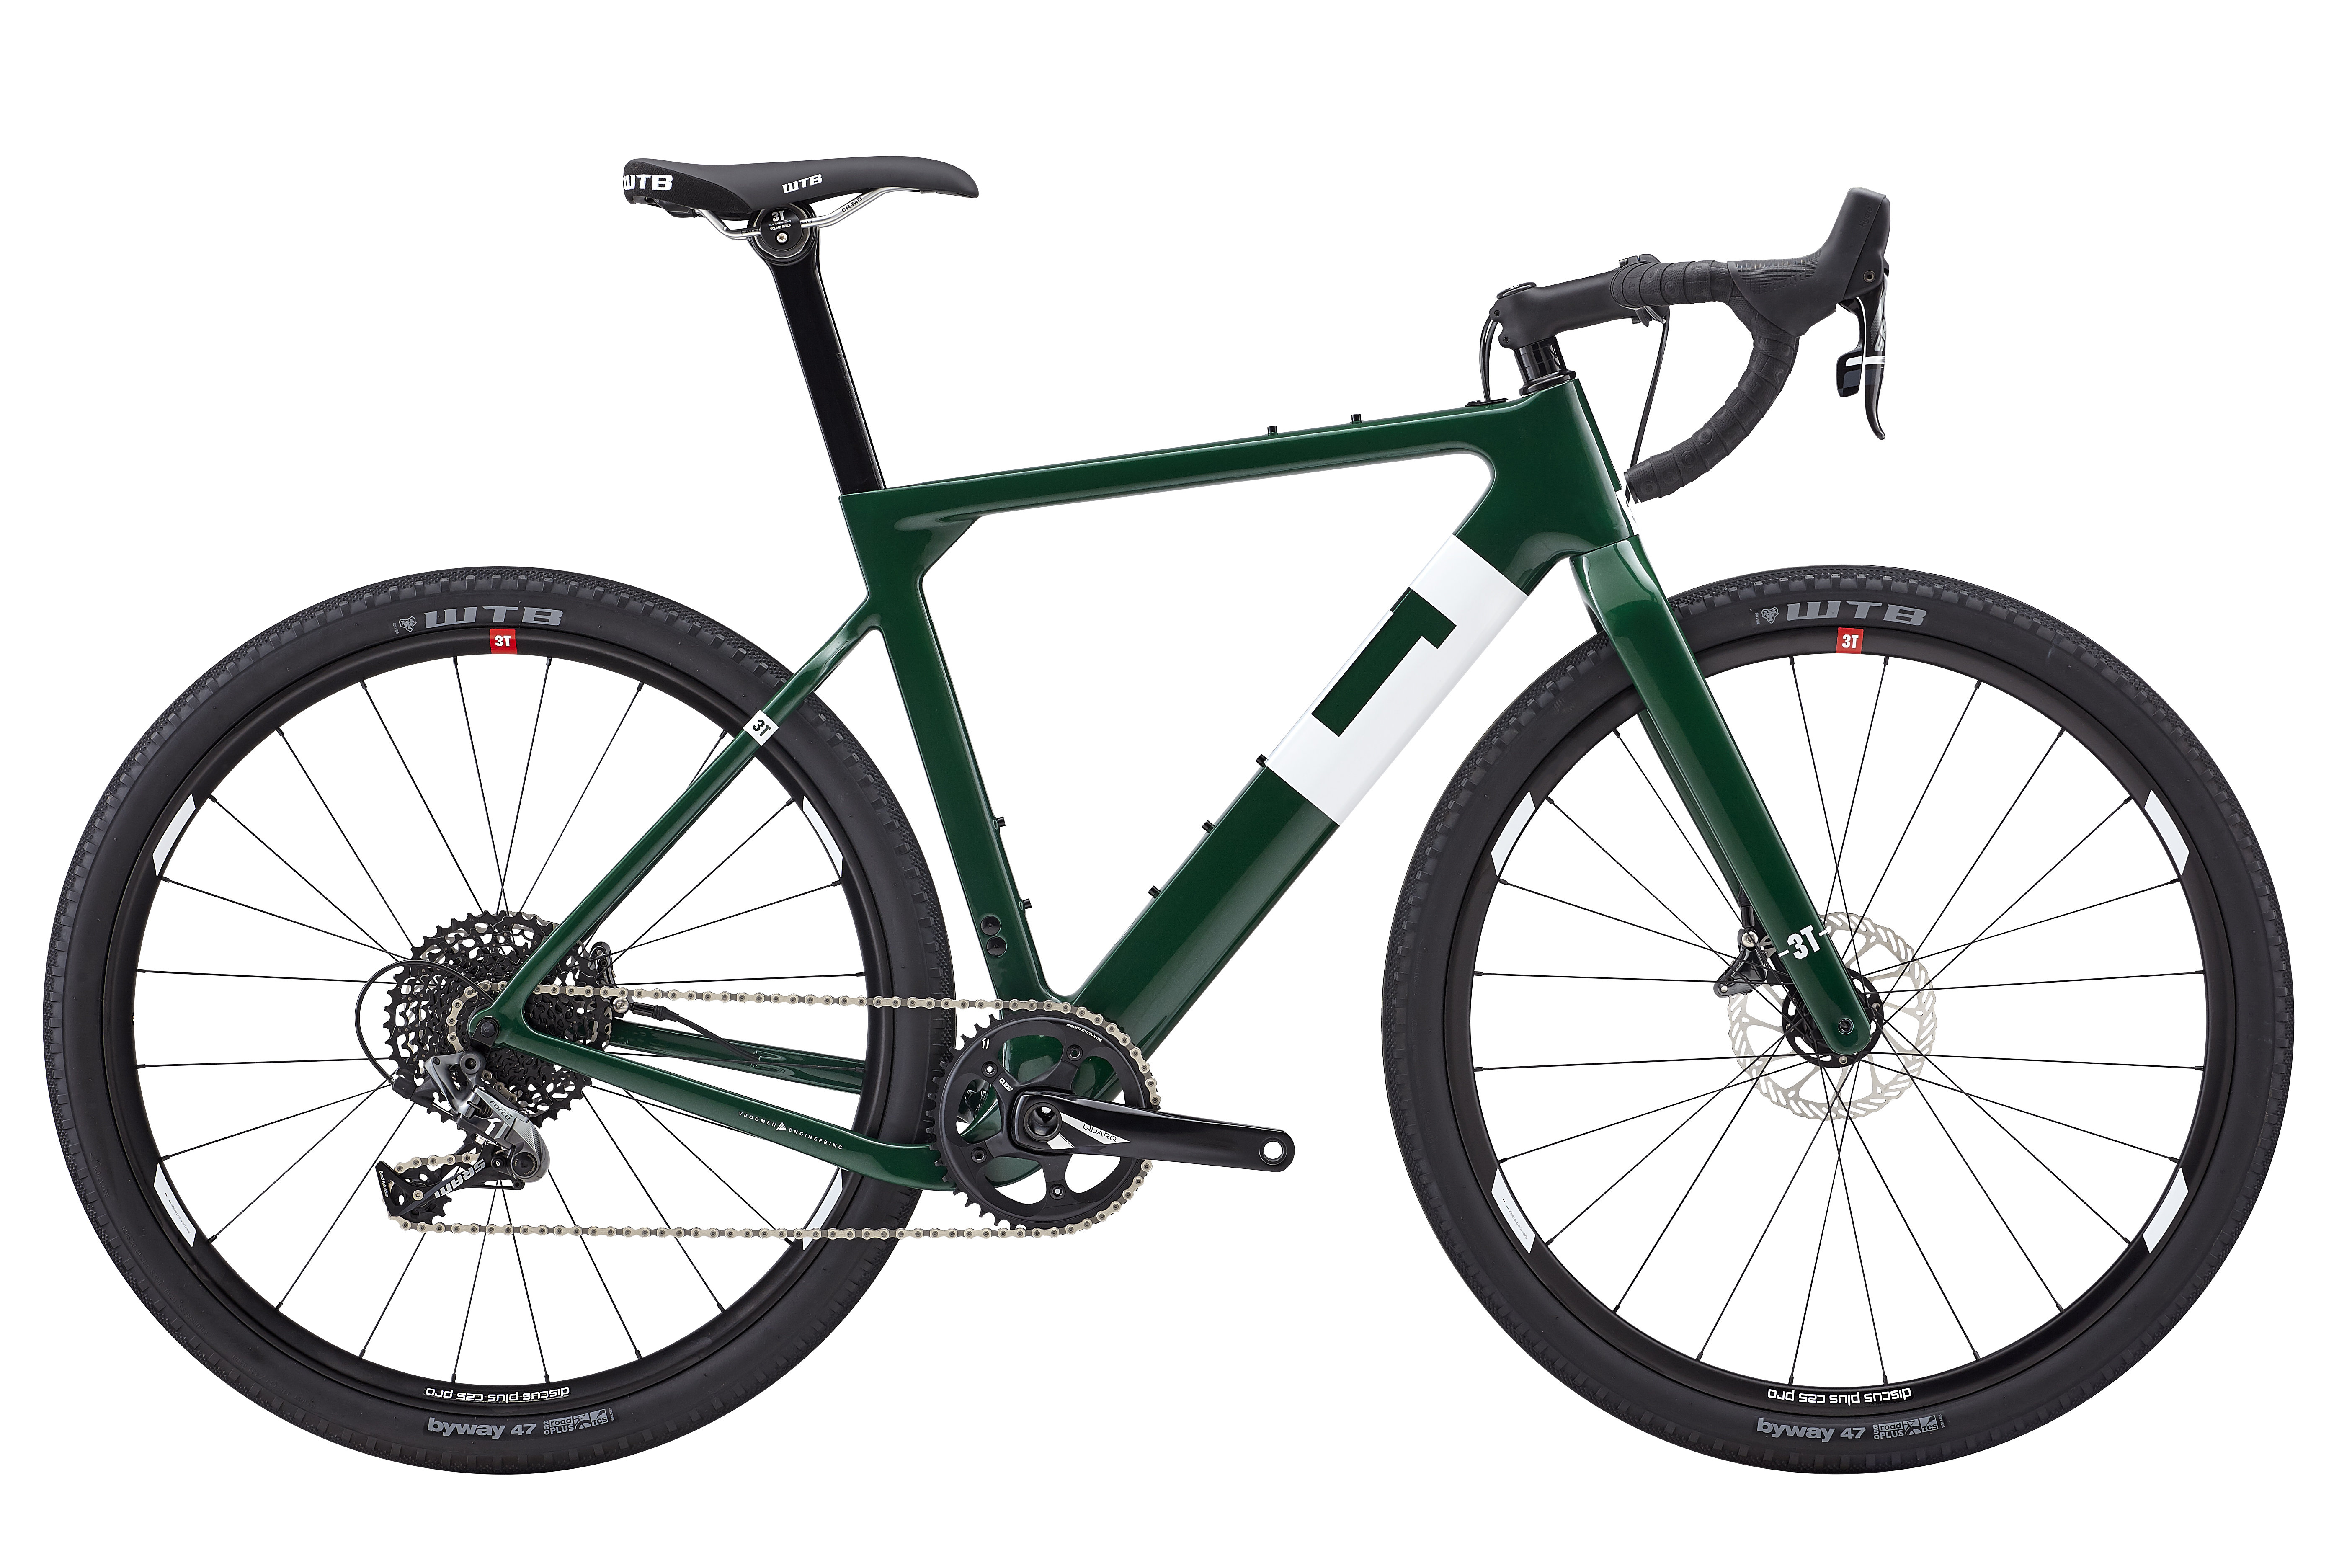 3T Exploro aero gravel bike looks even faster in Limited Edition Team Force Green